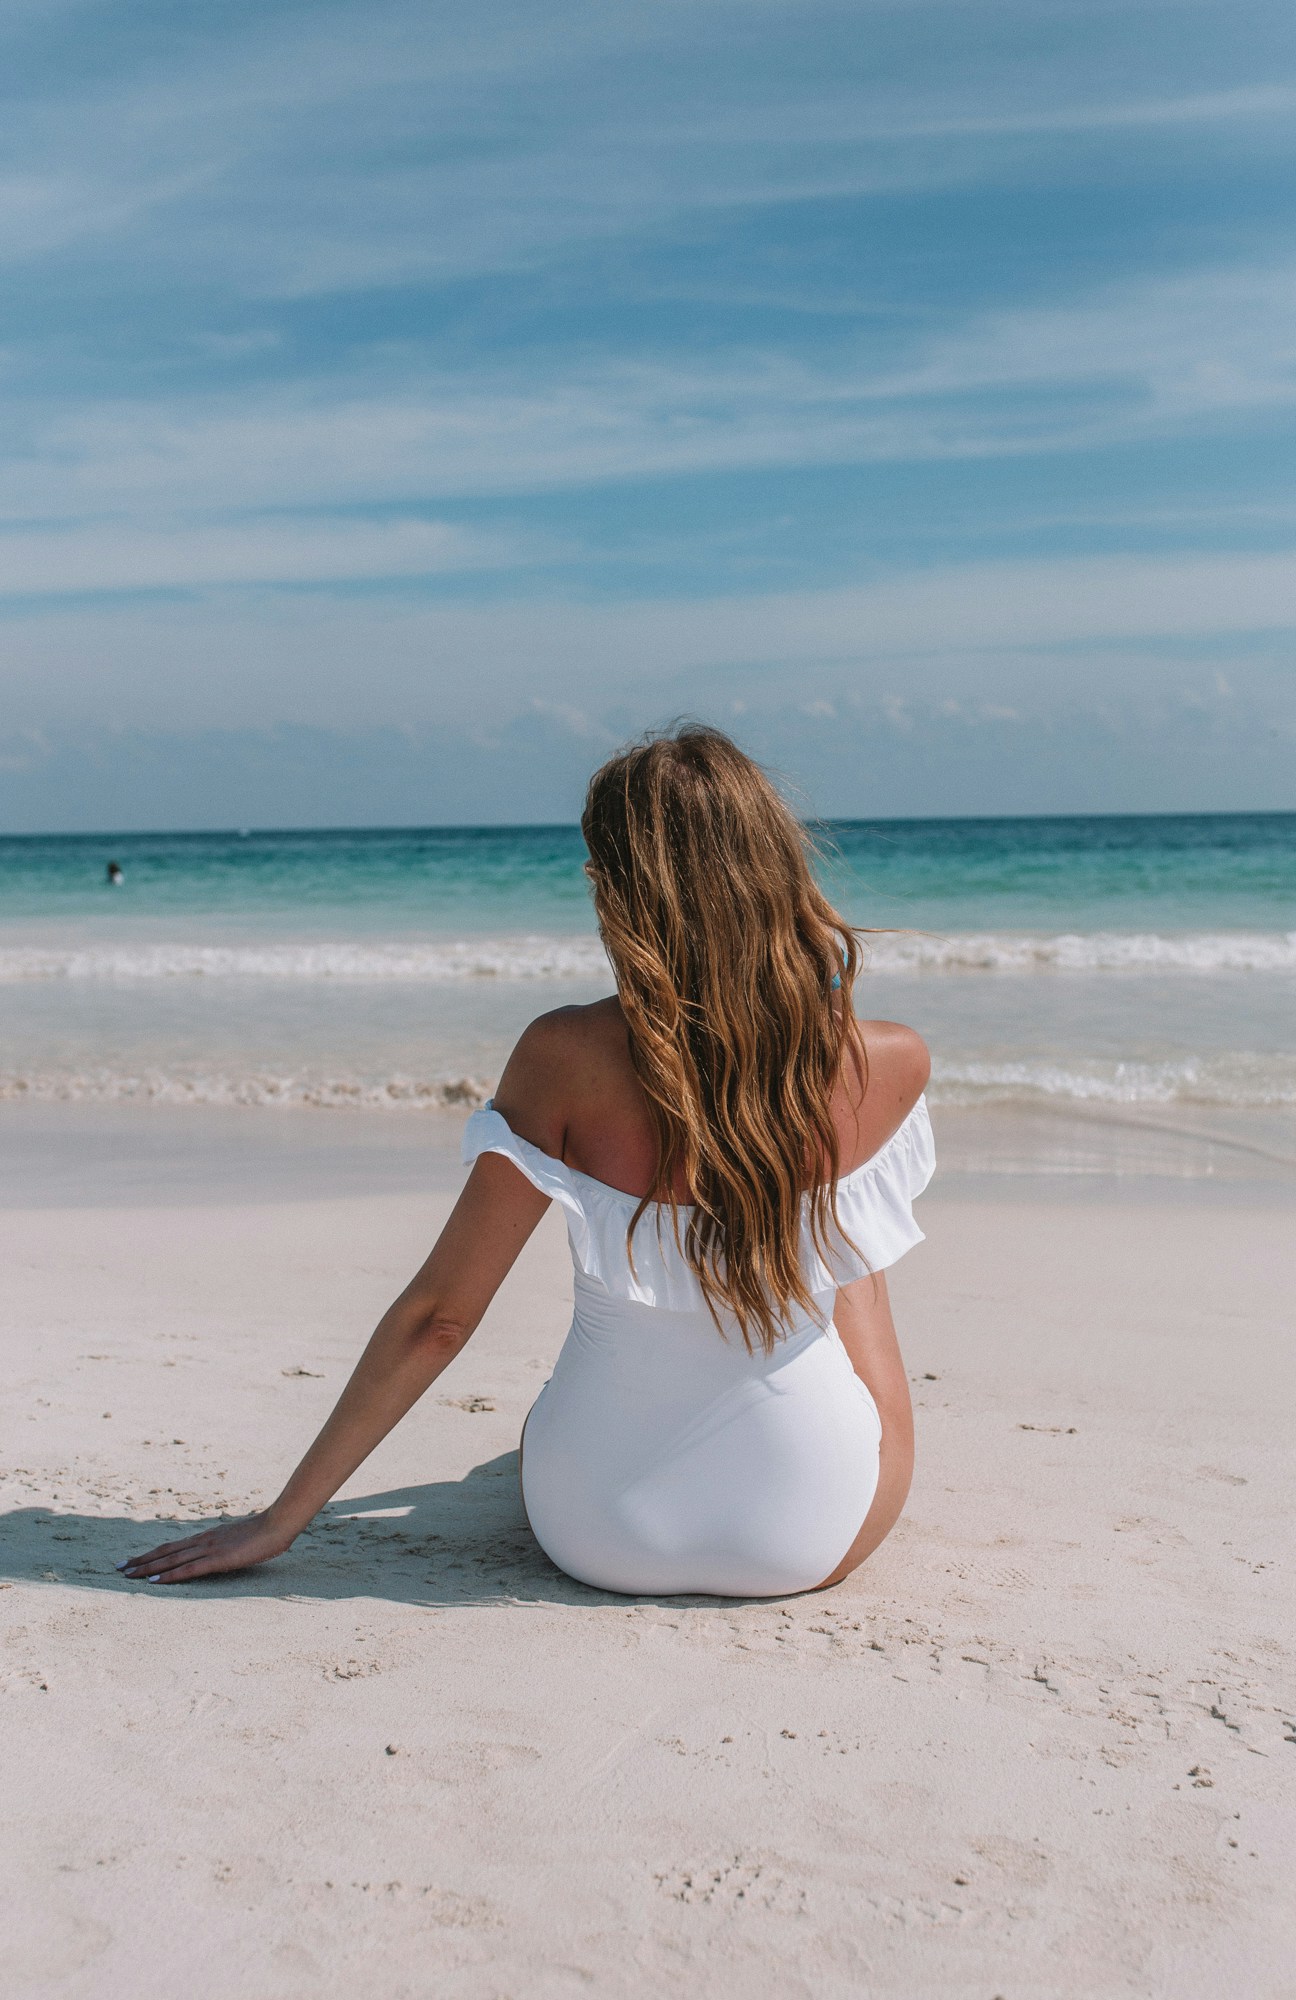 Tulum Playa Paraiso Beach - I wore a white off the shoulder one piece swimsuit from La Vie en Rose to relax on the white sandy beach of Tulum, Mexico.